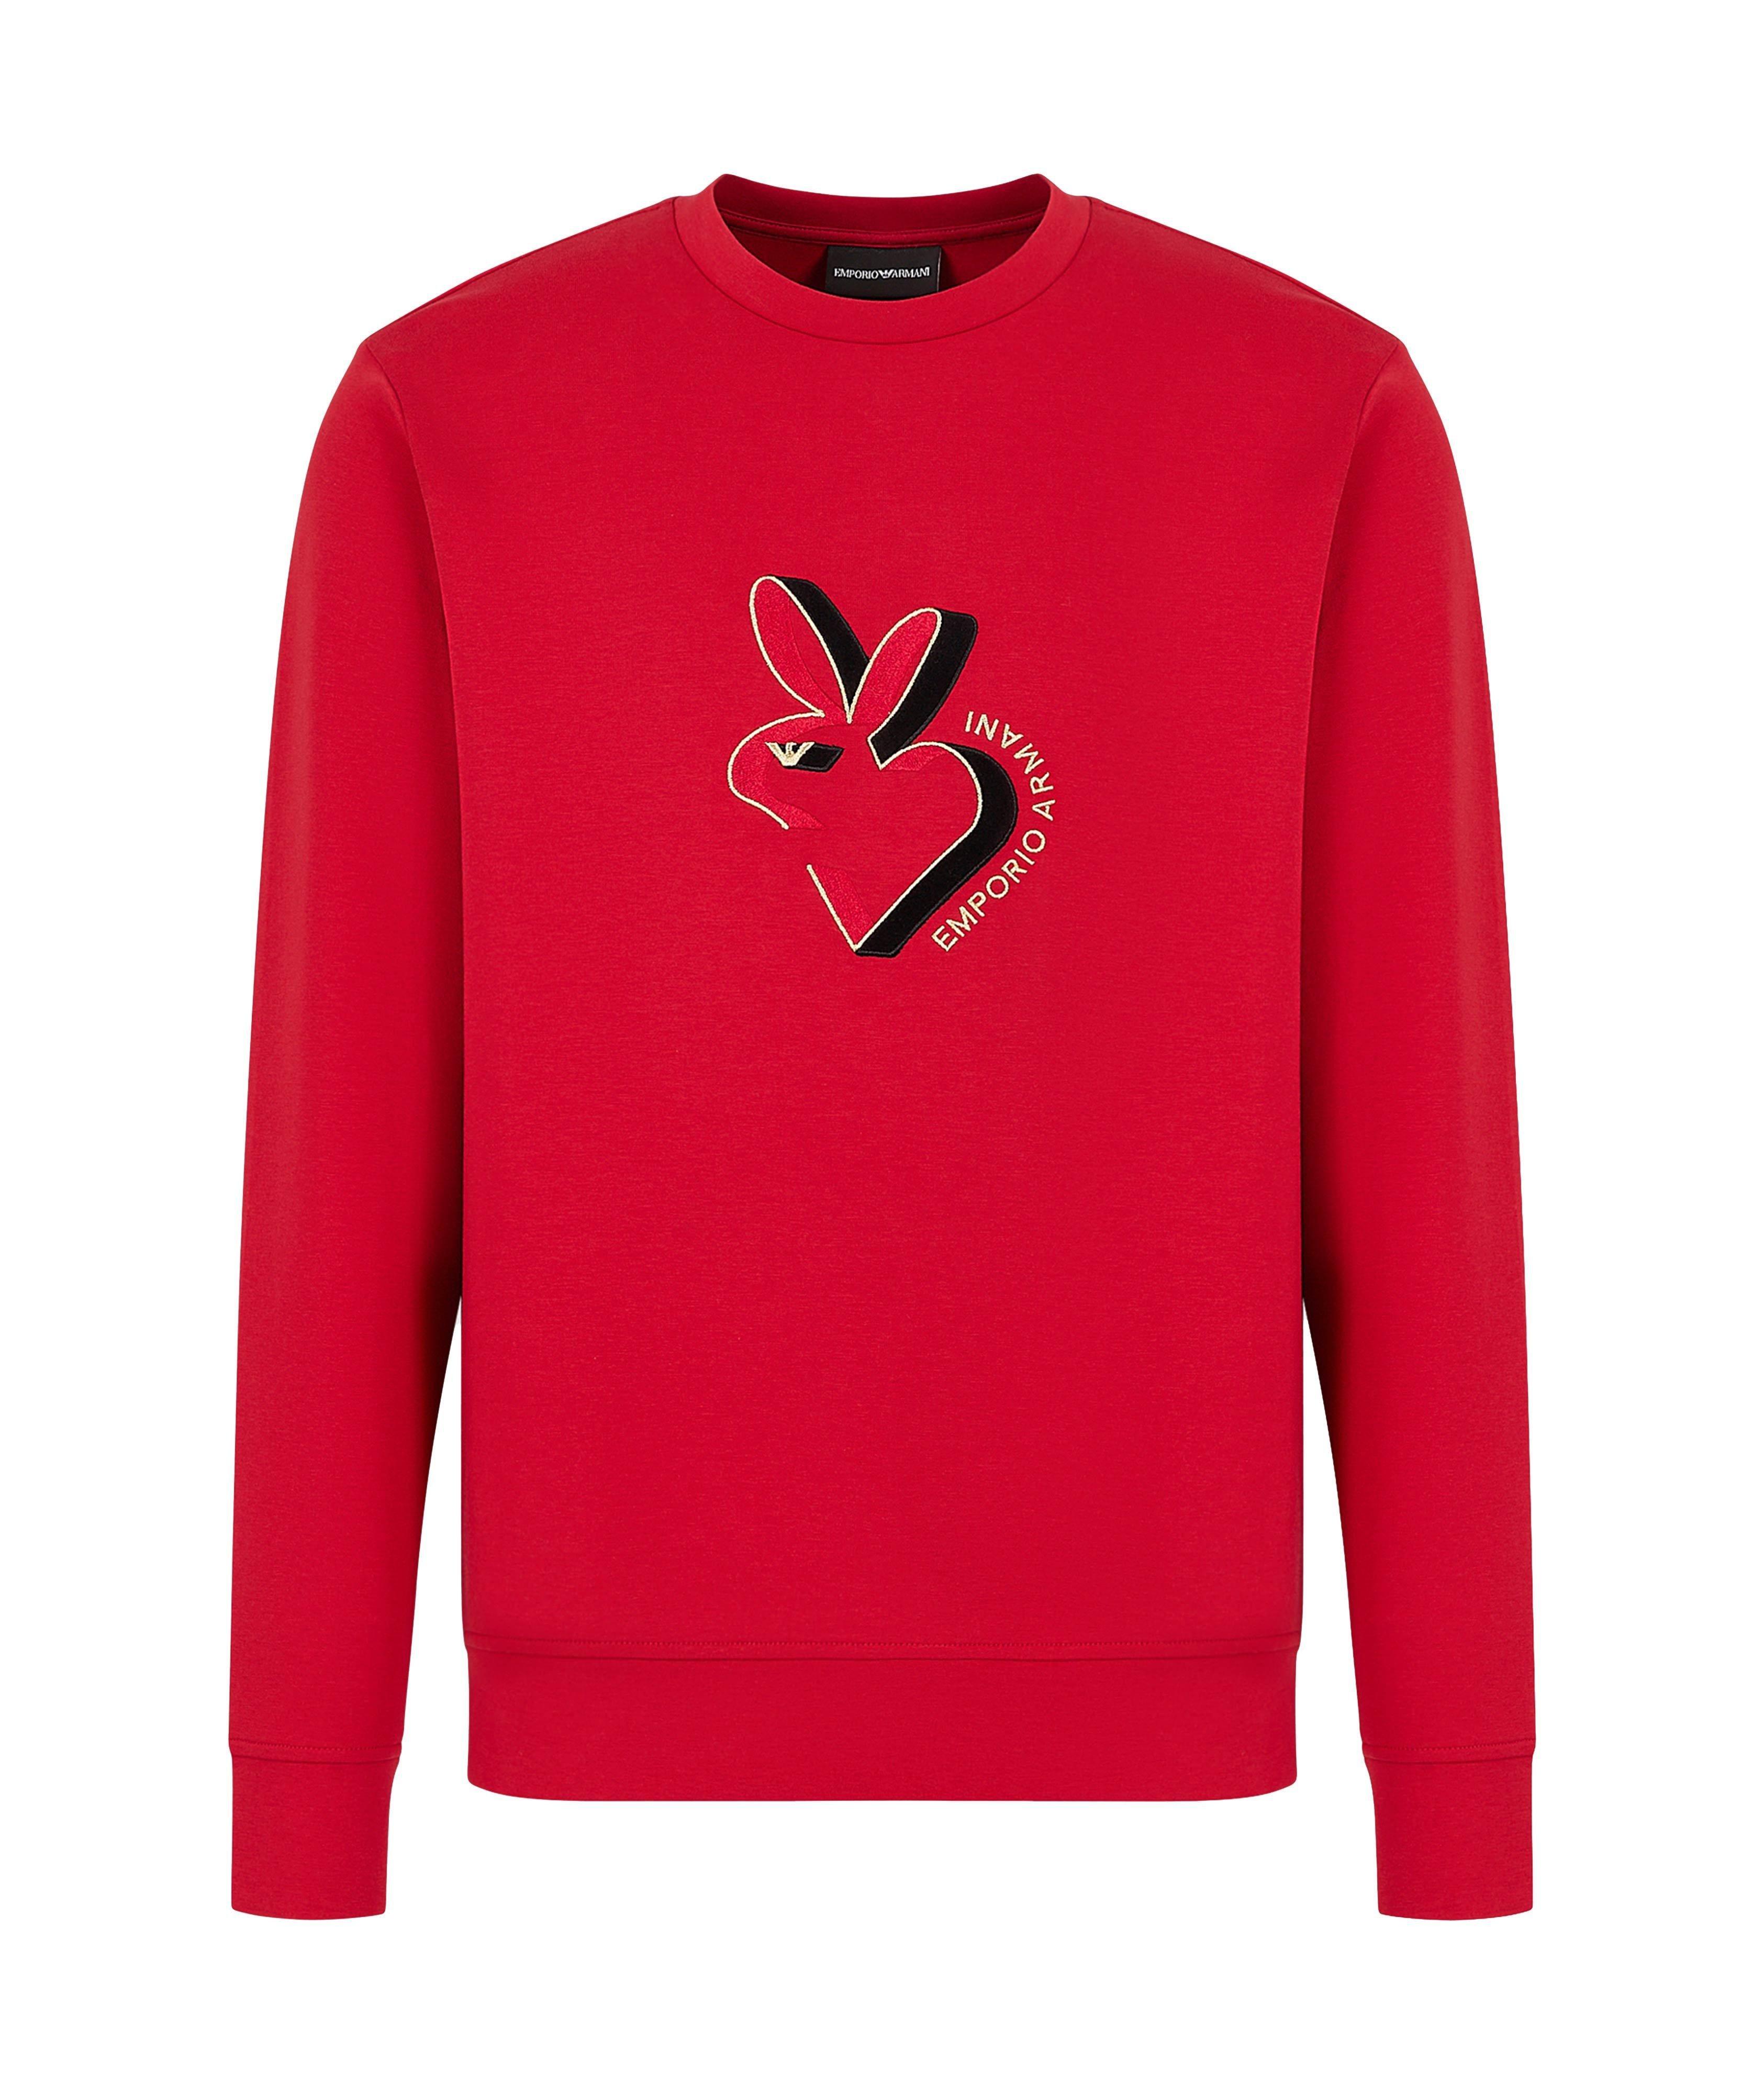 Lunar New Year Embroidery Crewneck Sweater image 0